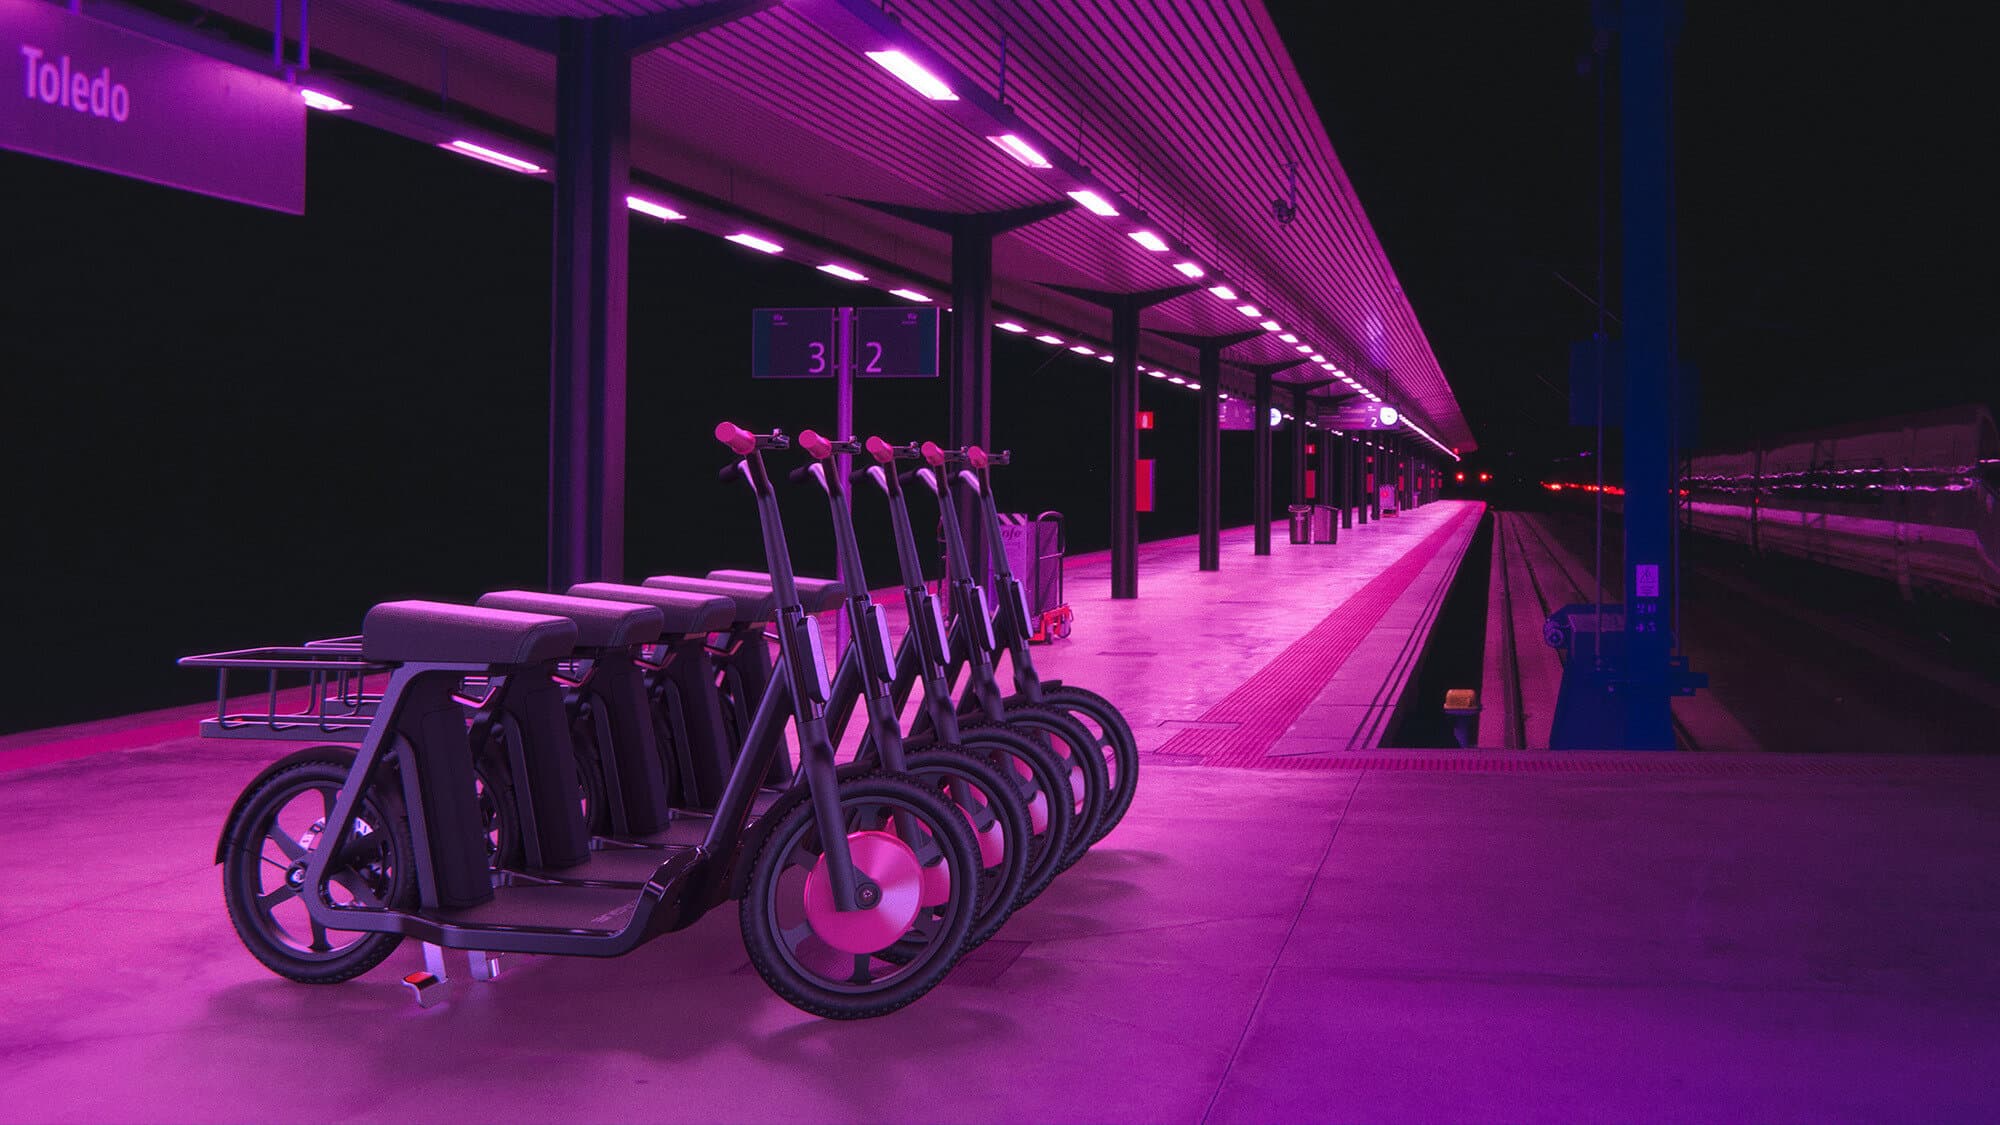 Electric scooter dock lit at night